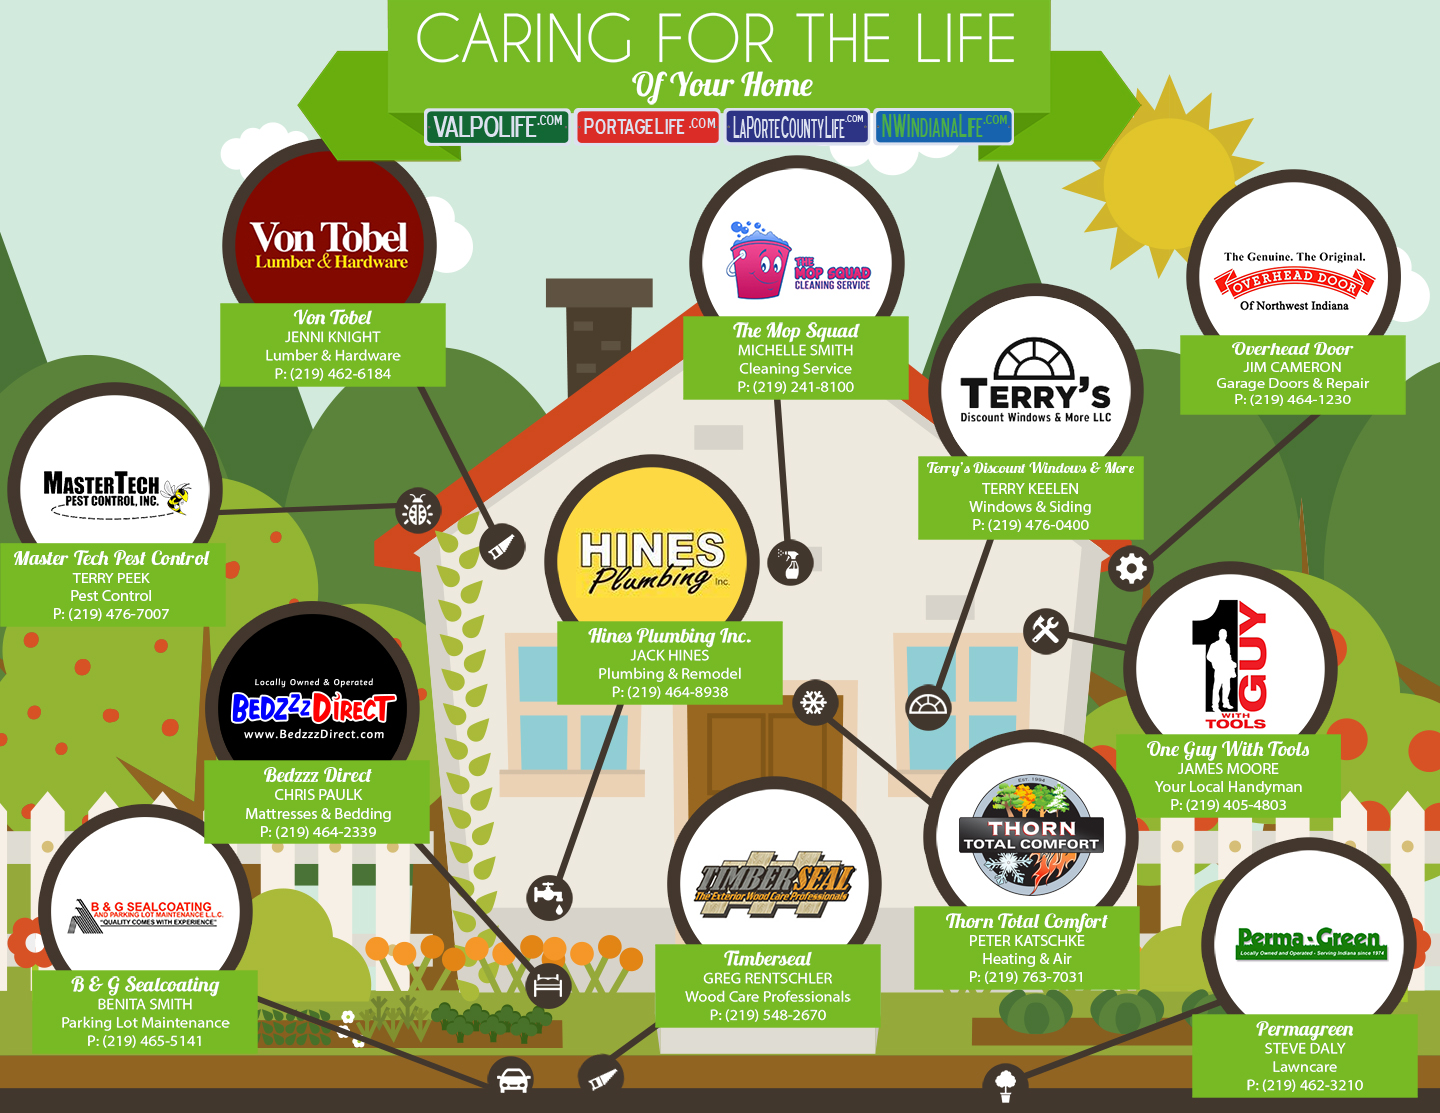 Caring for the Life of Your Home: Winterizing